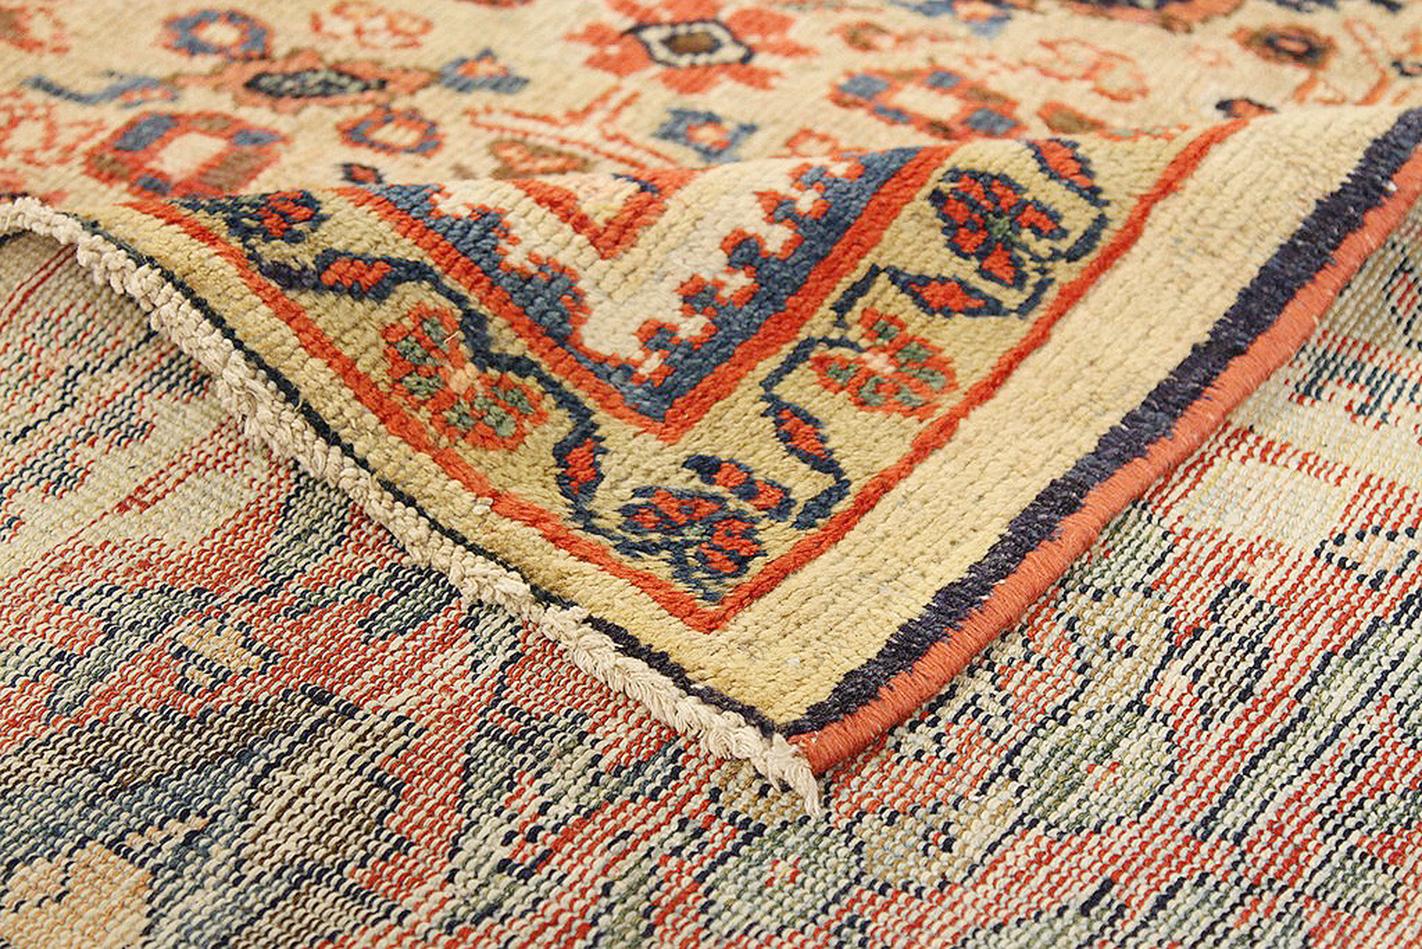 Hand-Woven 1910 Antique Persian Sultanabad Rug with Navy & Red Floral Motif on Ivory Field For Sale